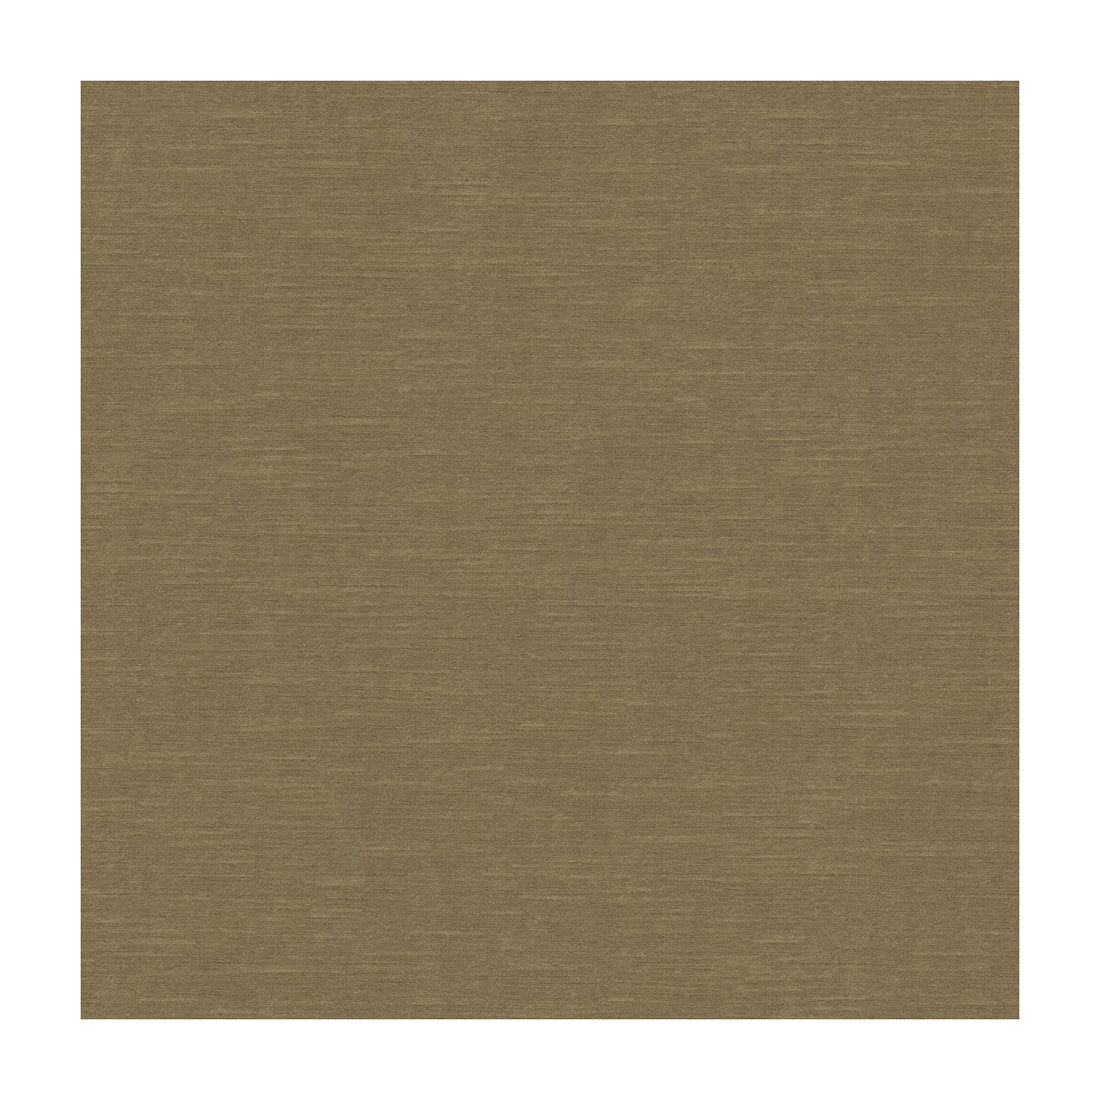 Venetian fabric in taupe color - pattern 31326.316.0 - by Kravet Design